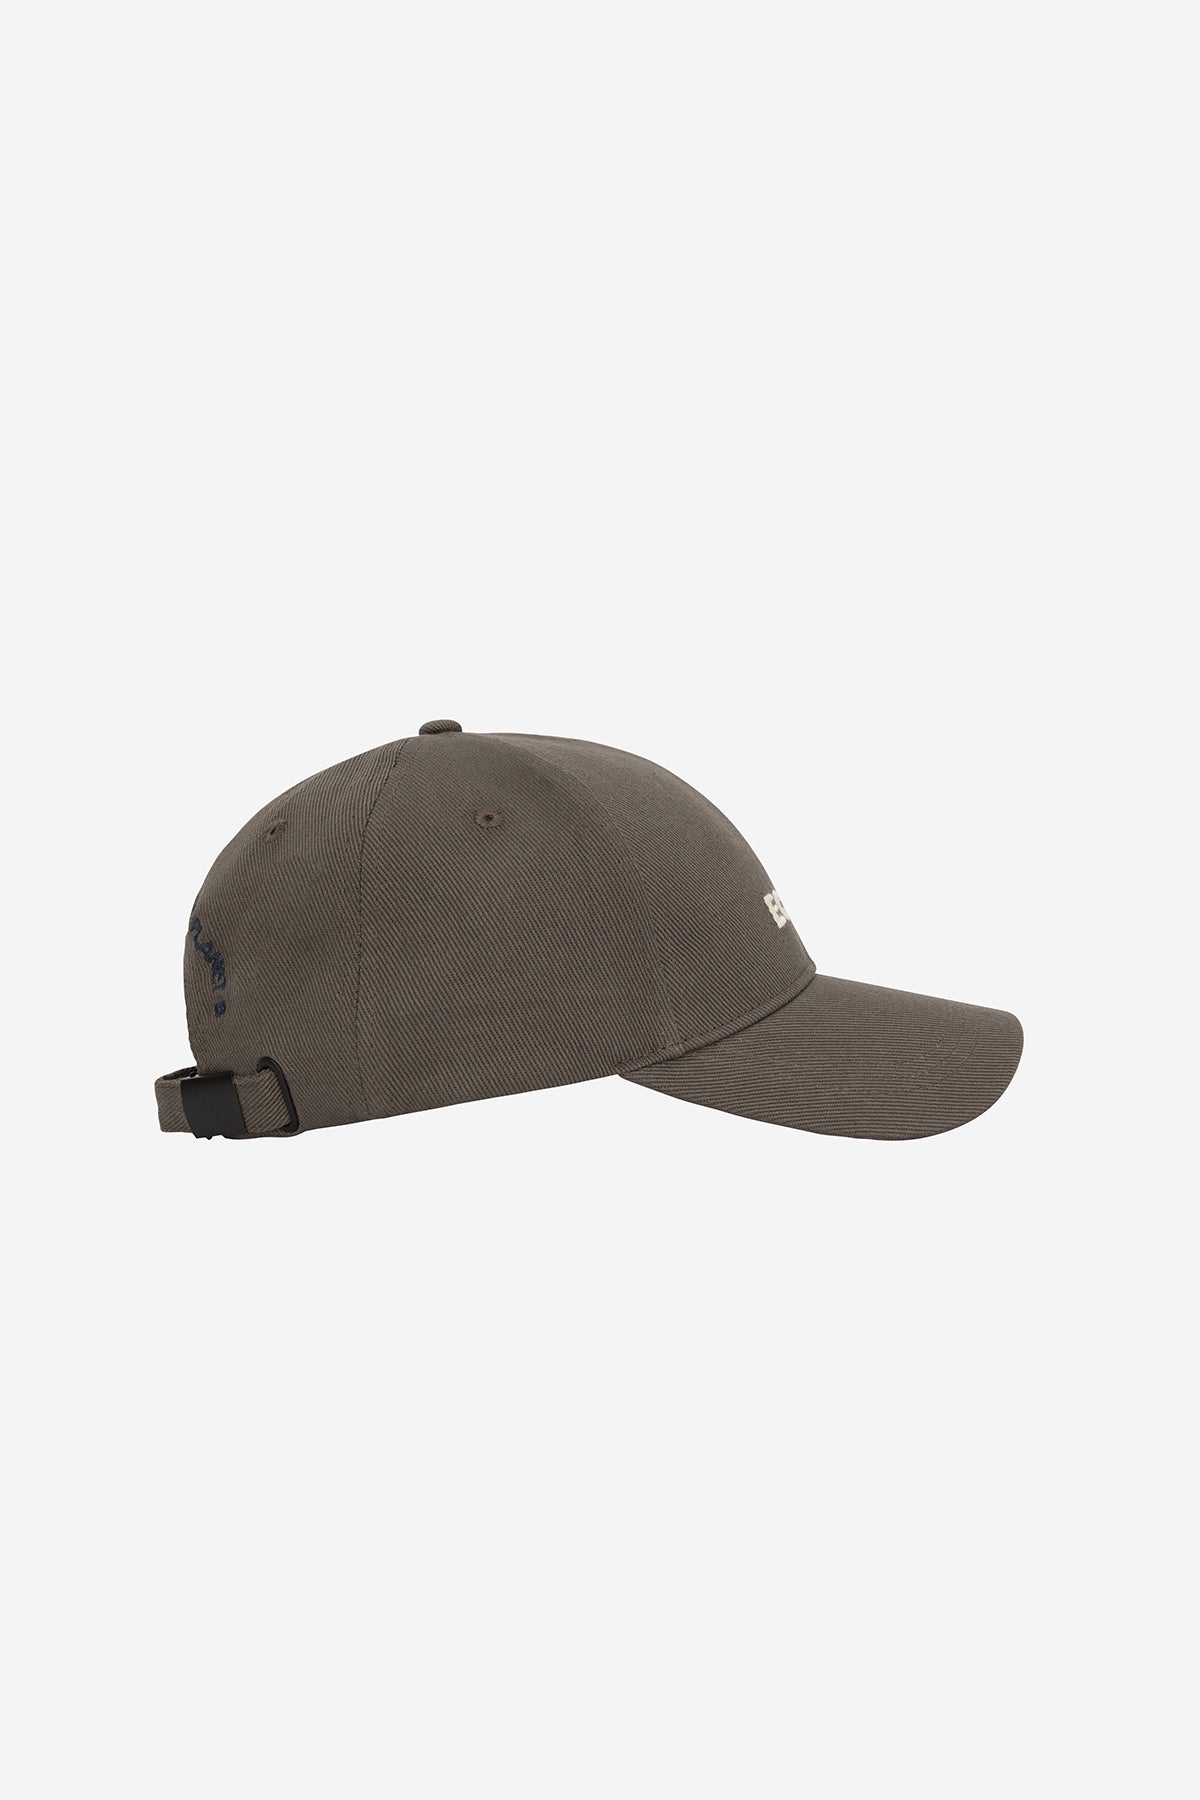 BROWN EMBROIDERED CAP 